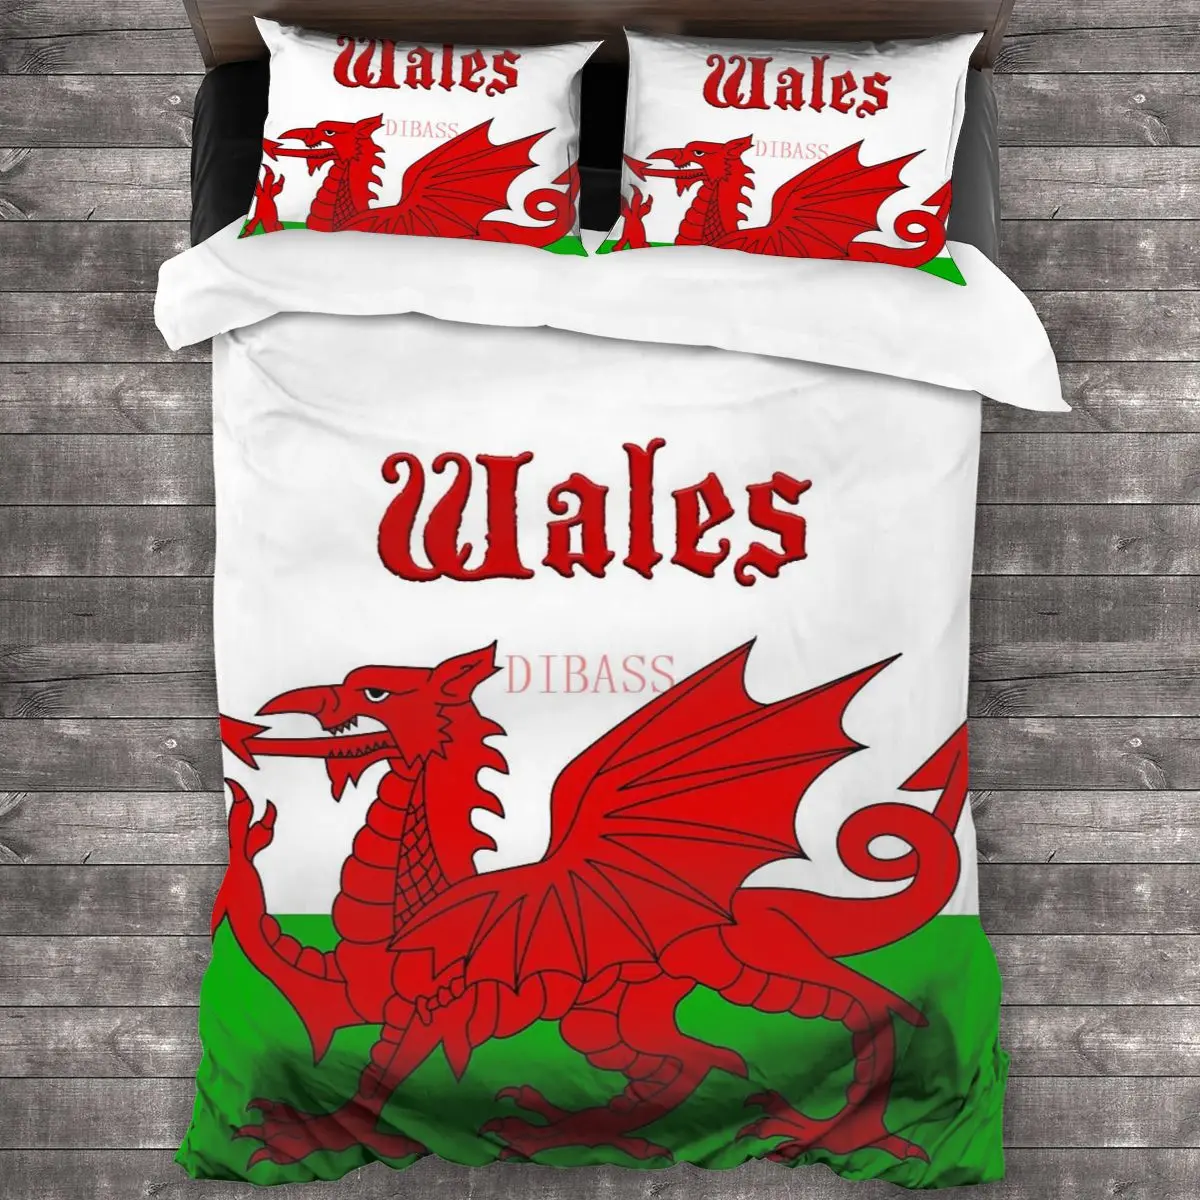 

Wales Flag - Cymru Baner - High Quality Image Soft Microfiber Comforter Set with 2 Pillowcase Quilt Cover With Zipper Closure